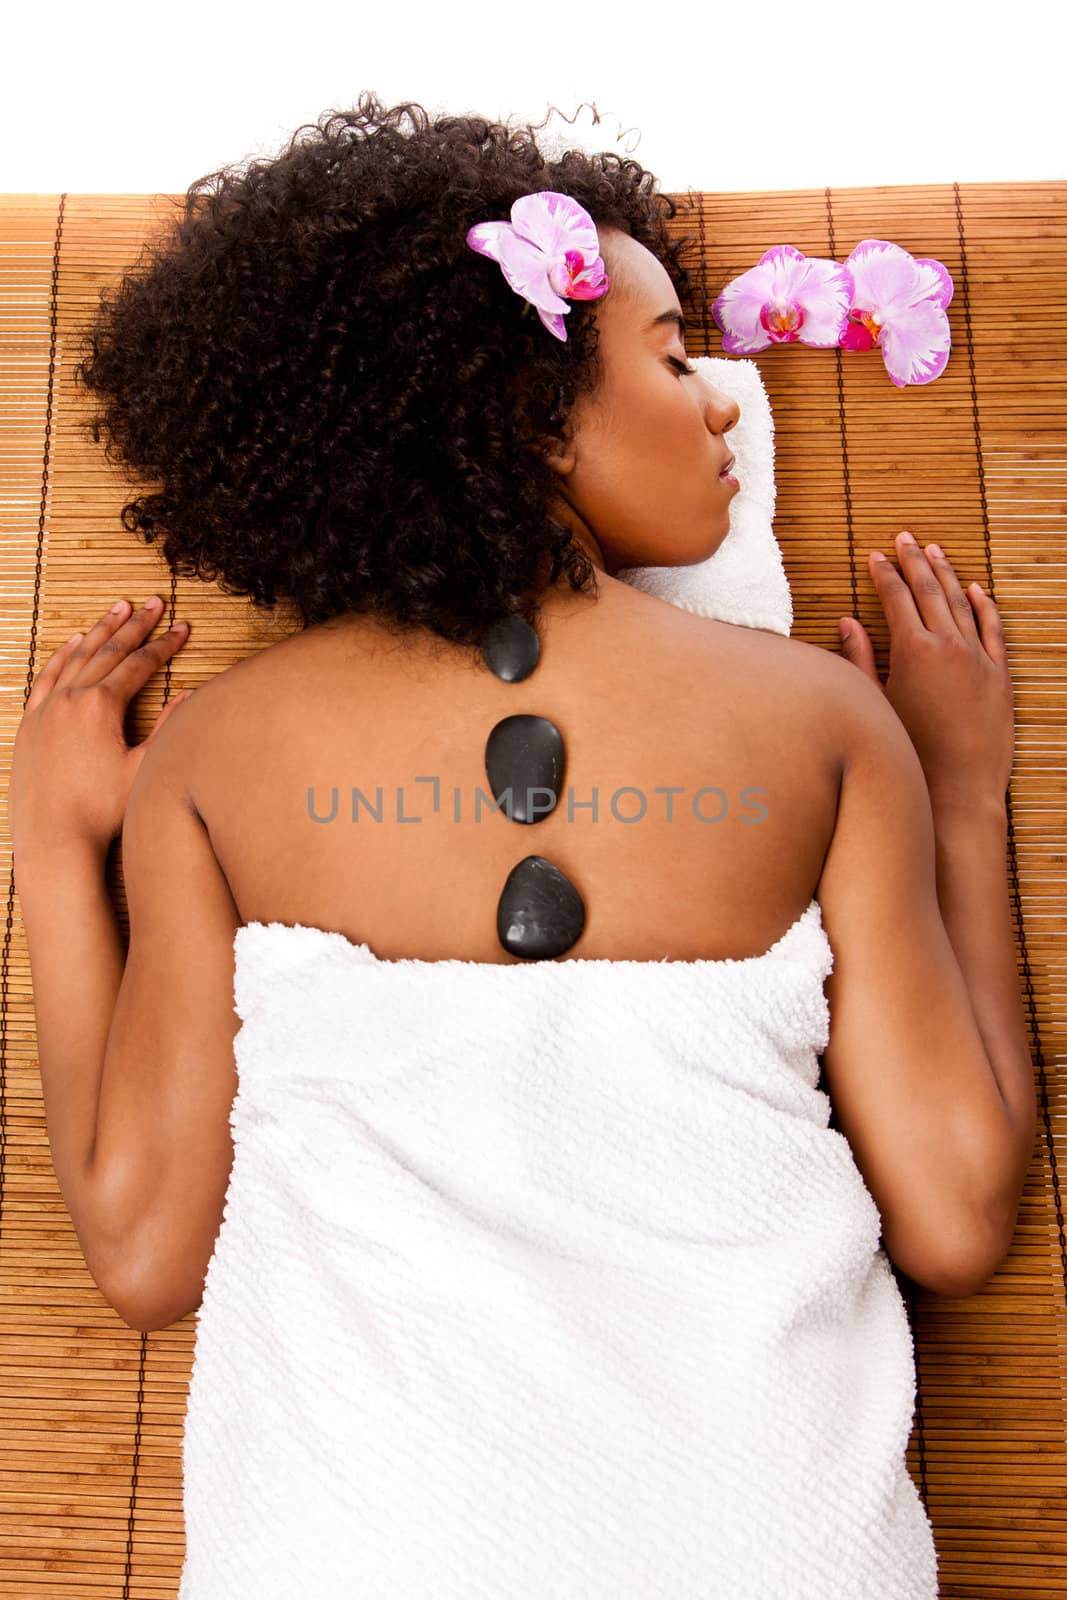 Beautiful happy relaxed Latina-African woman at health day spa with hot lastone therapy massage treatment laying in white towel on bamboo table decorated with orchids.